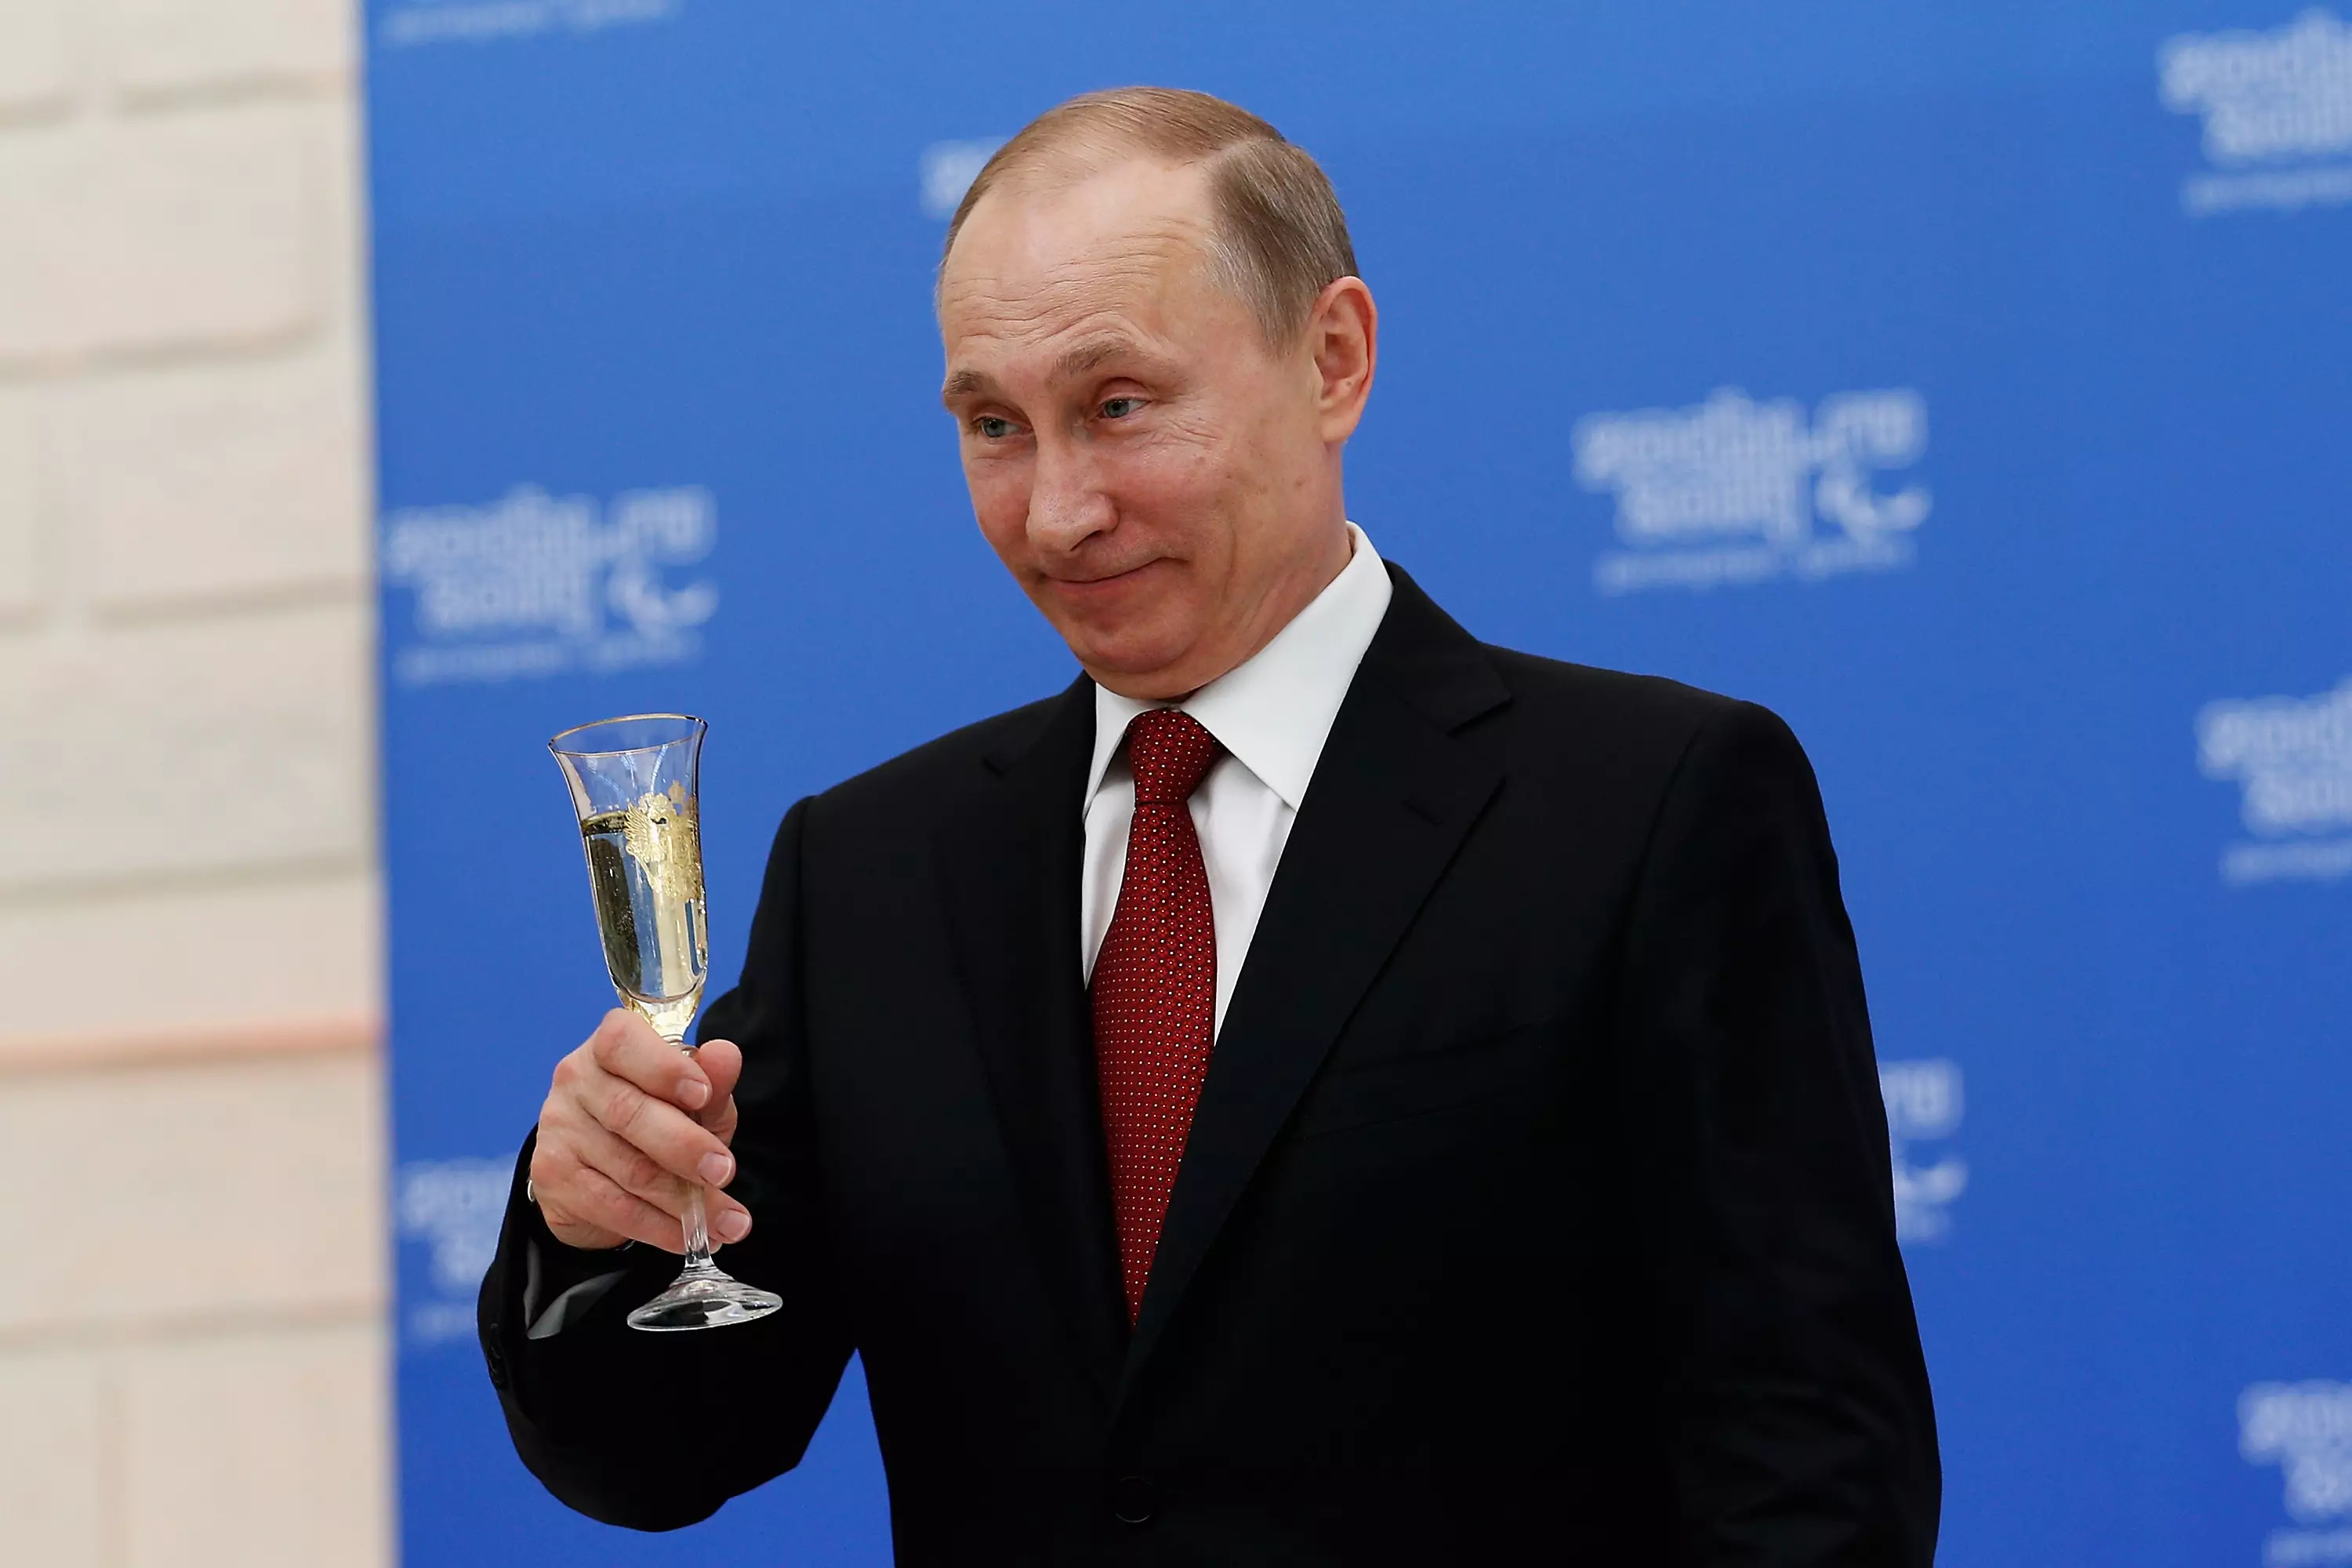 Vladimir Putin Has Reportedly Trolled English Supporters With Dismissive Speech